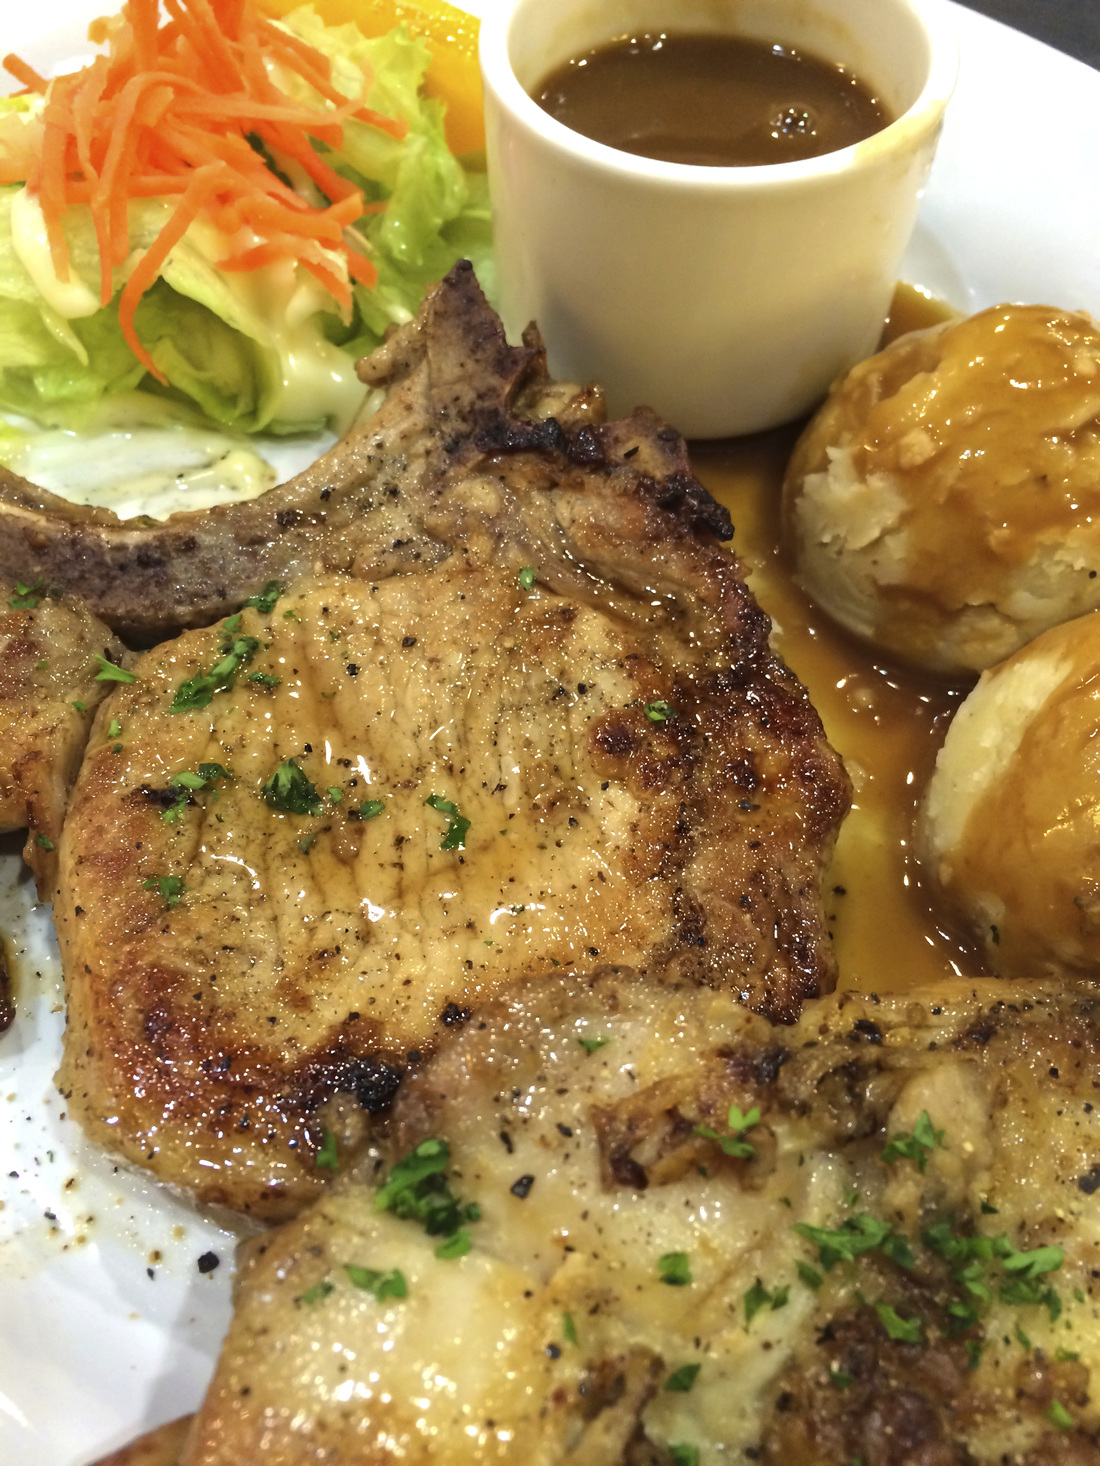 Pork chops with potatoes